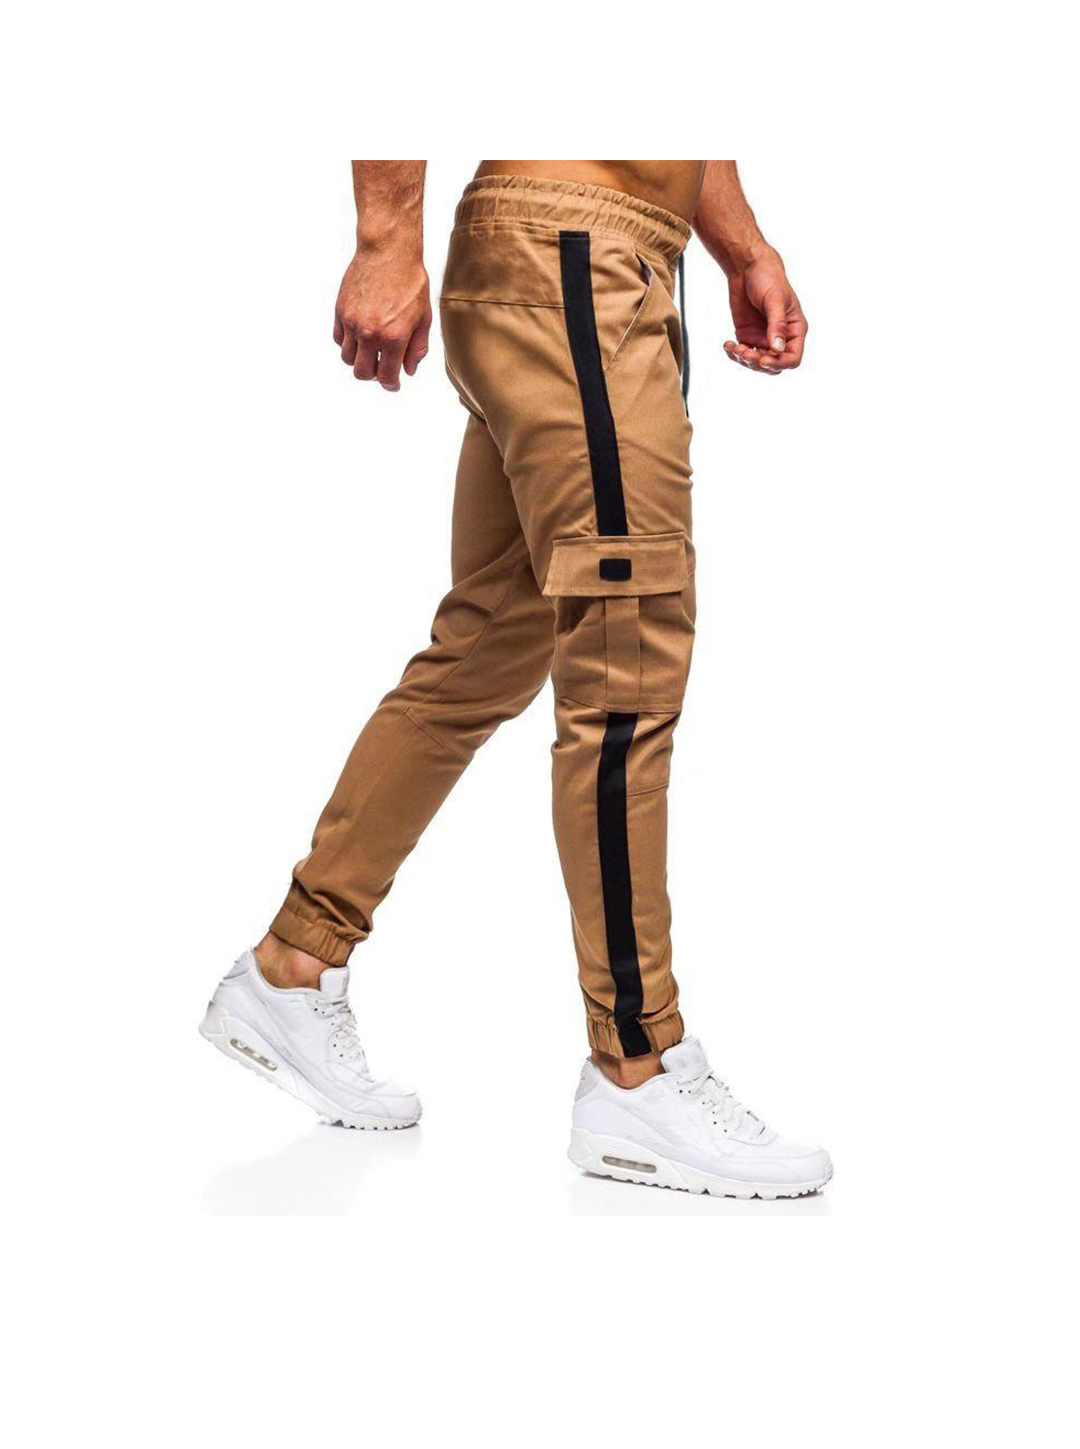 Posey Contrasting Color Details Cargo Pants